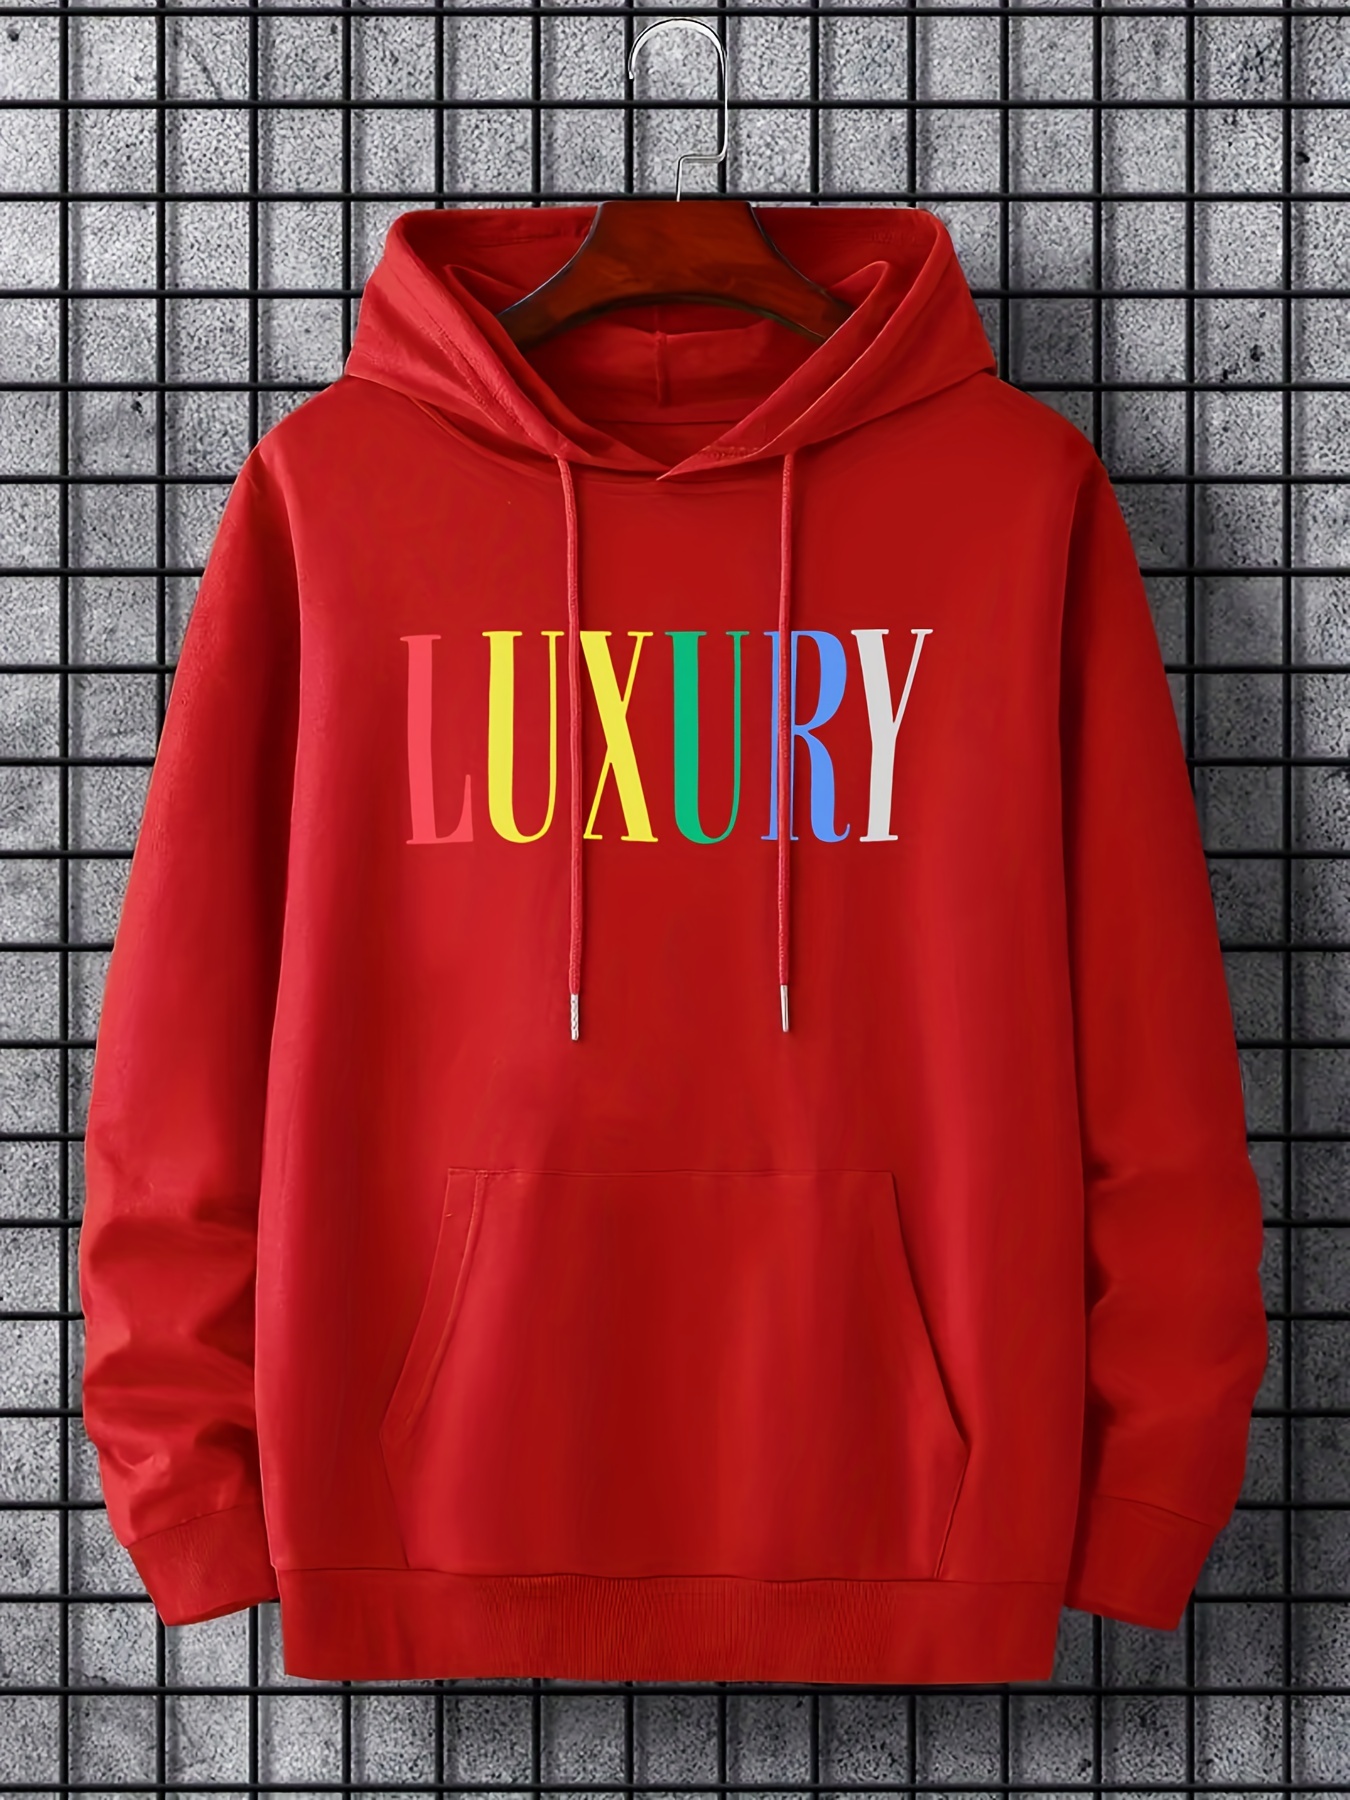 Plus Size Mens Rainbow Luxury Print Casual Hoodie Sweatshirt With Pocket  Drawstring Hooded Pullovers Sweat Shirt Mens Autumn And Winter Outfits, Discounts For Everyone